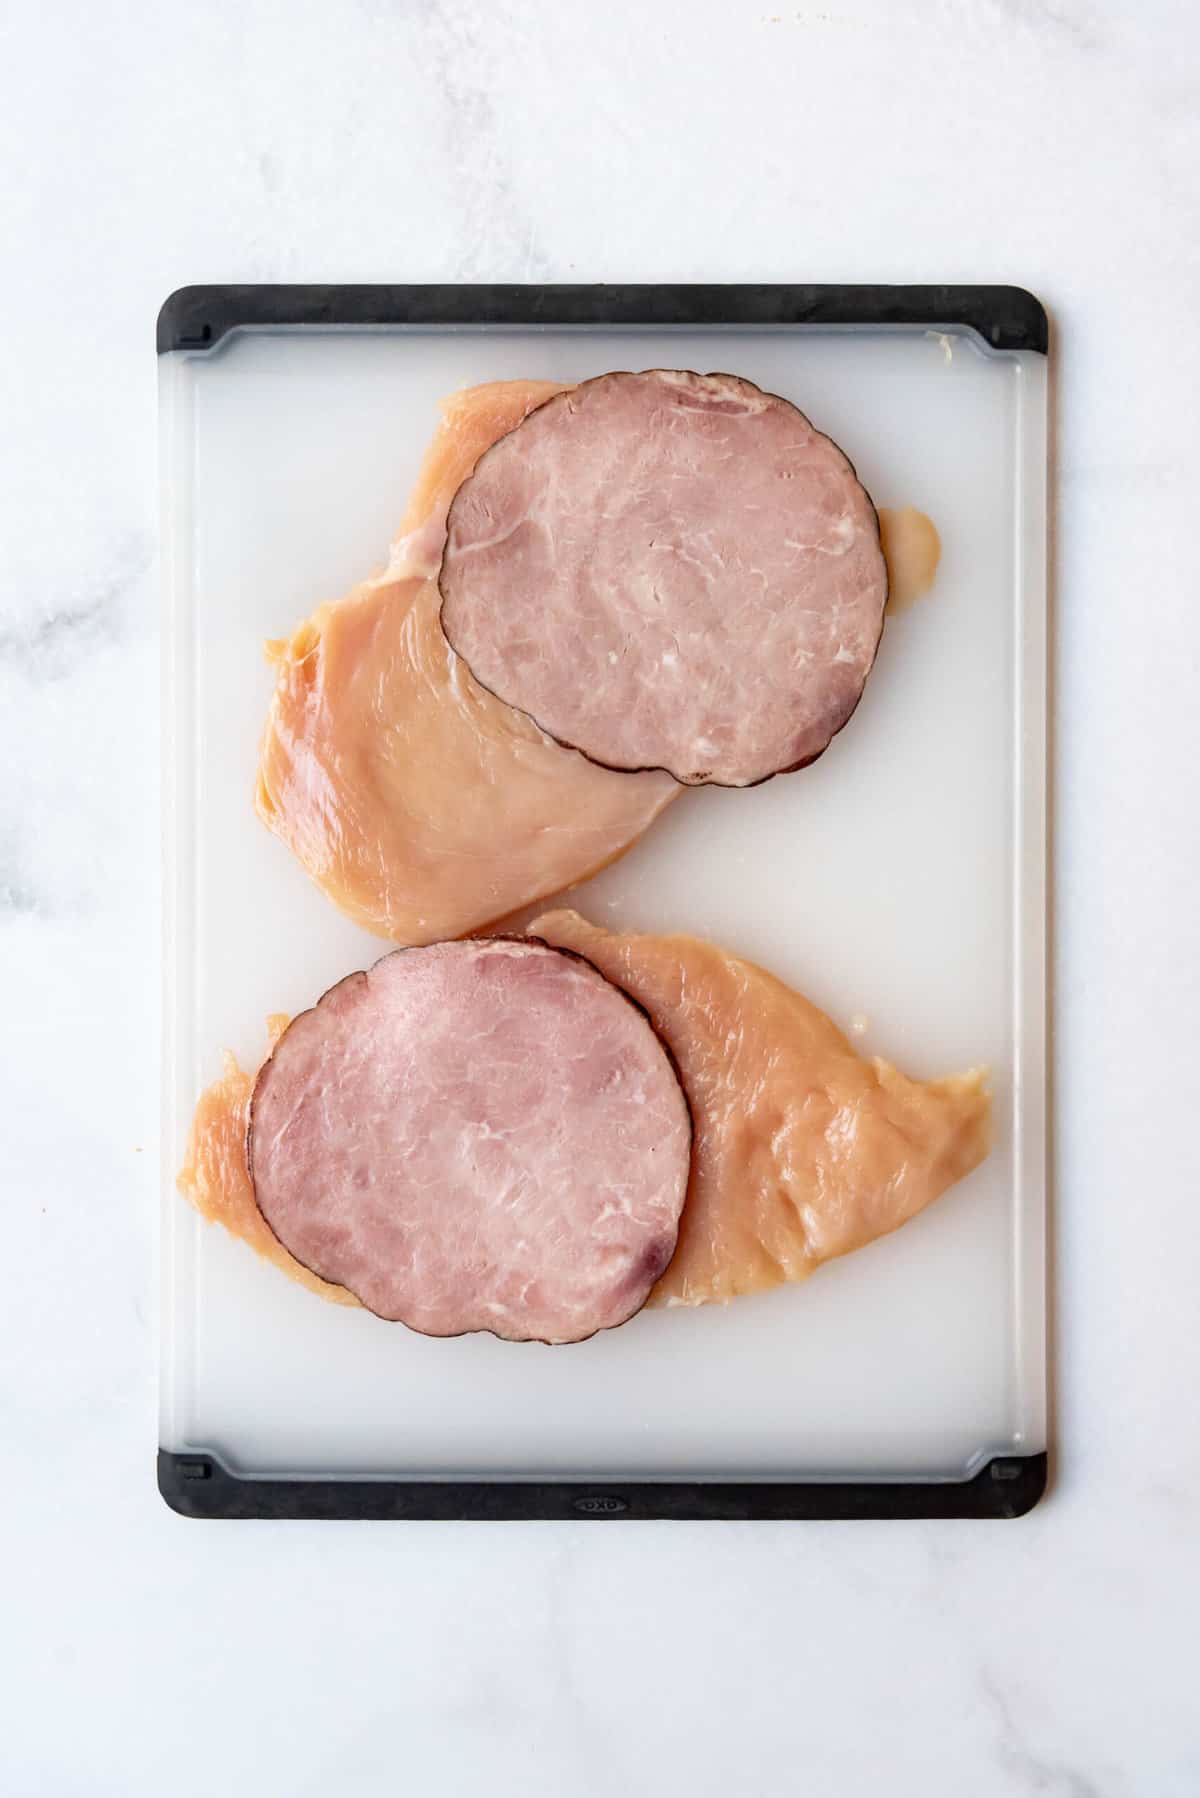 Slices of ham on top of two chicken breasts that have been pounded flat.